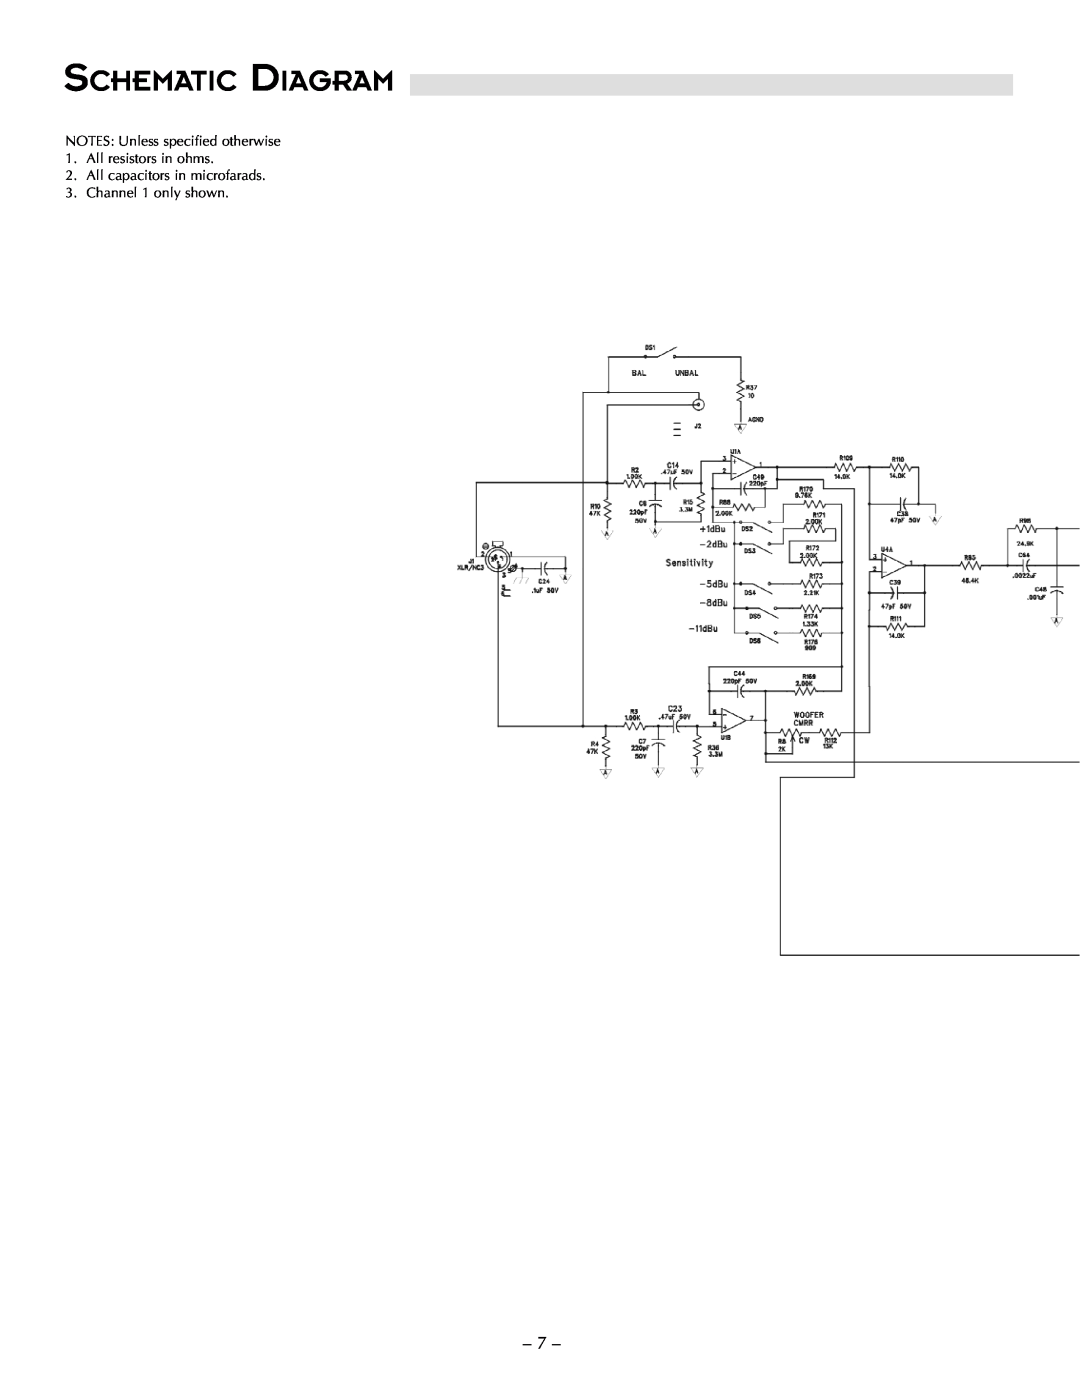 Hafler TRM6.1CE manual Schematic Diagram, NOTES Unless specified otherwise 1. All resistors in ohms 